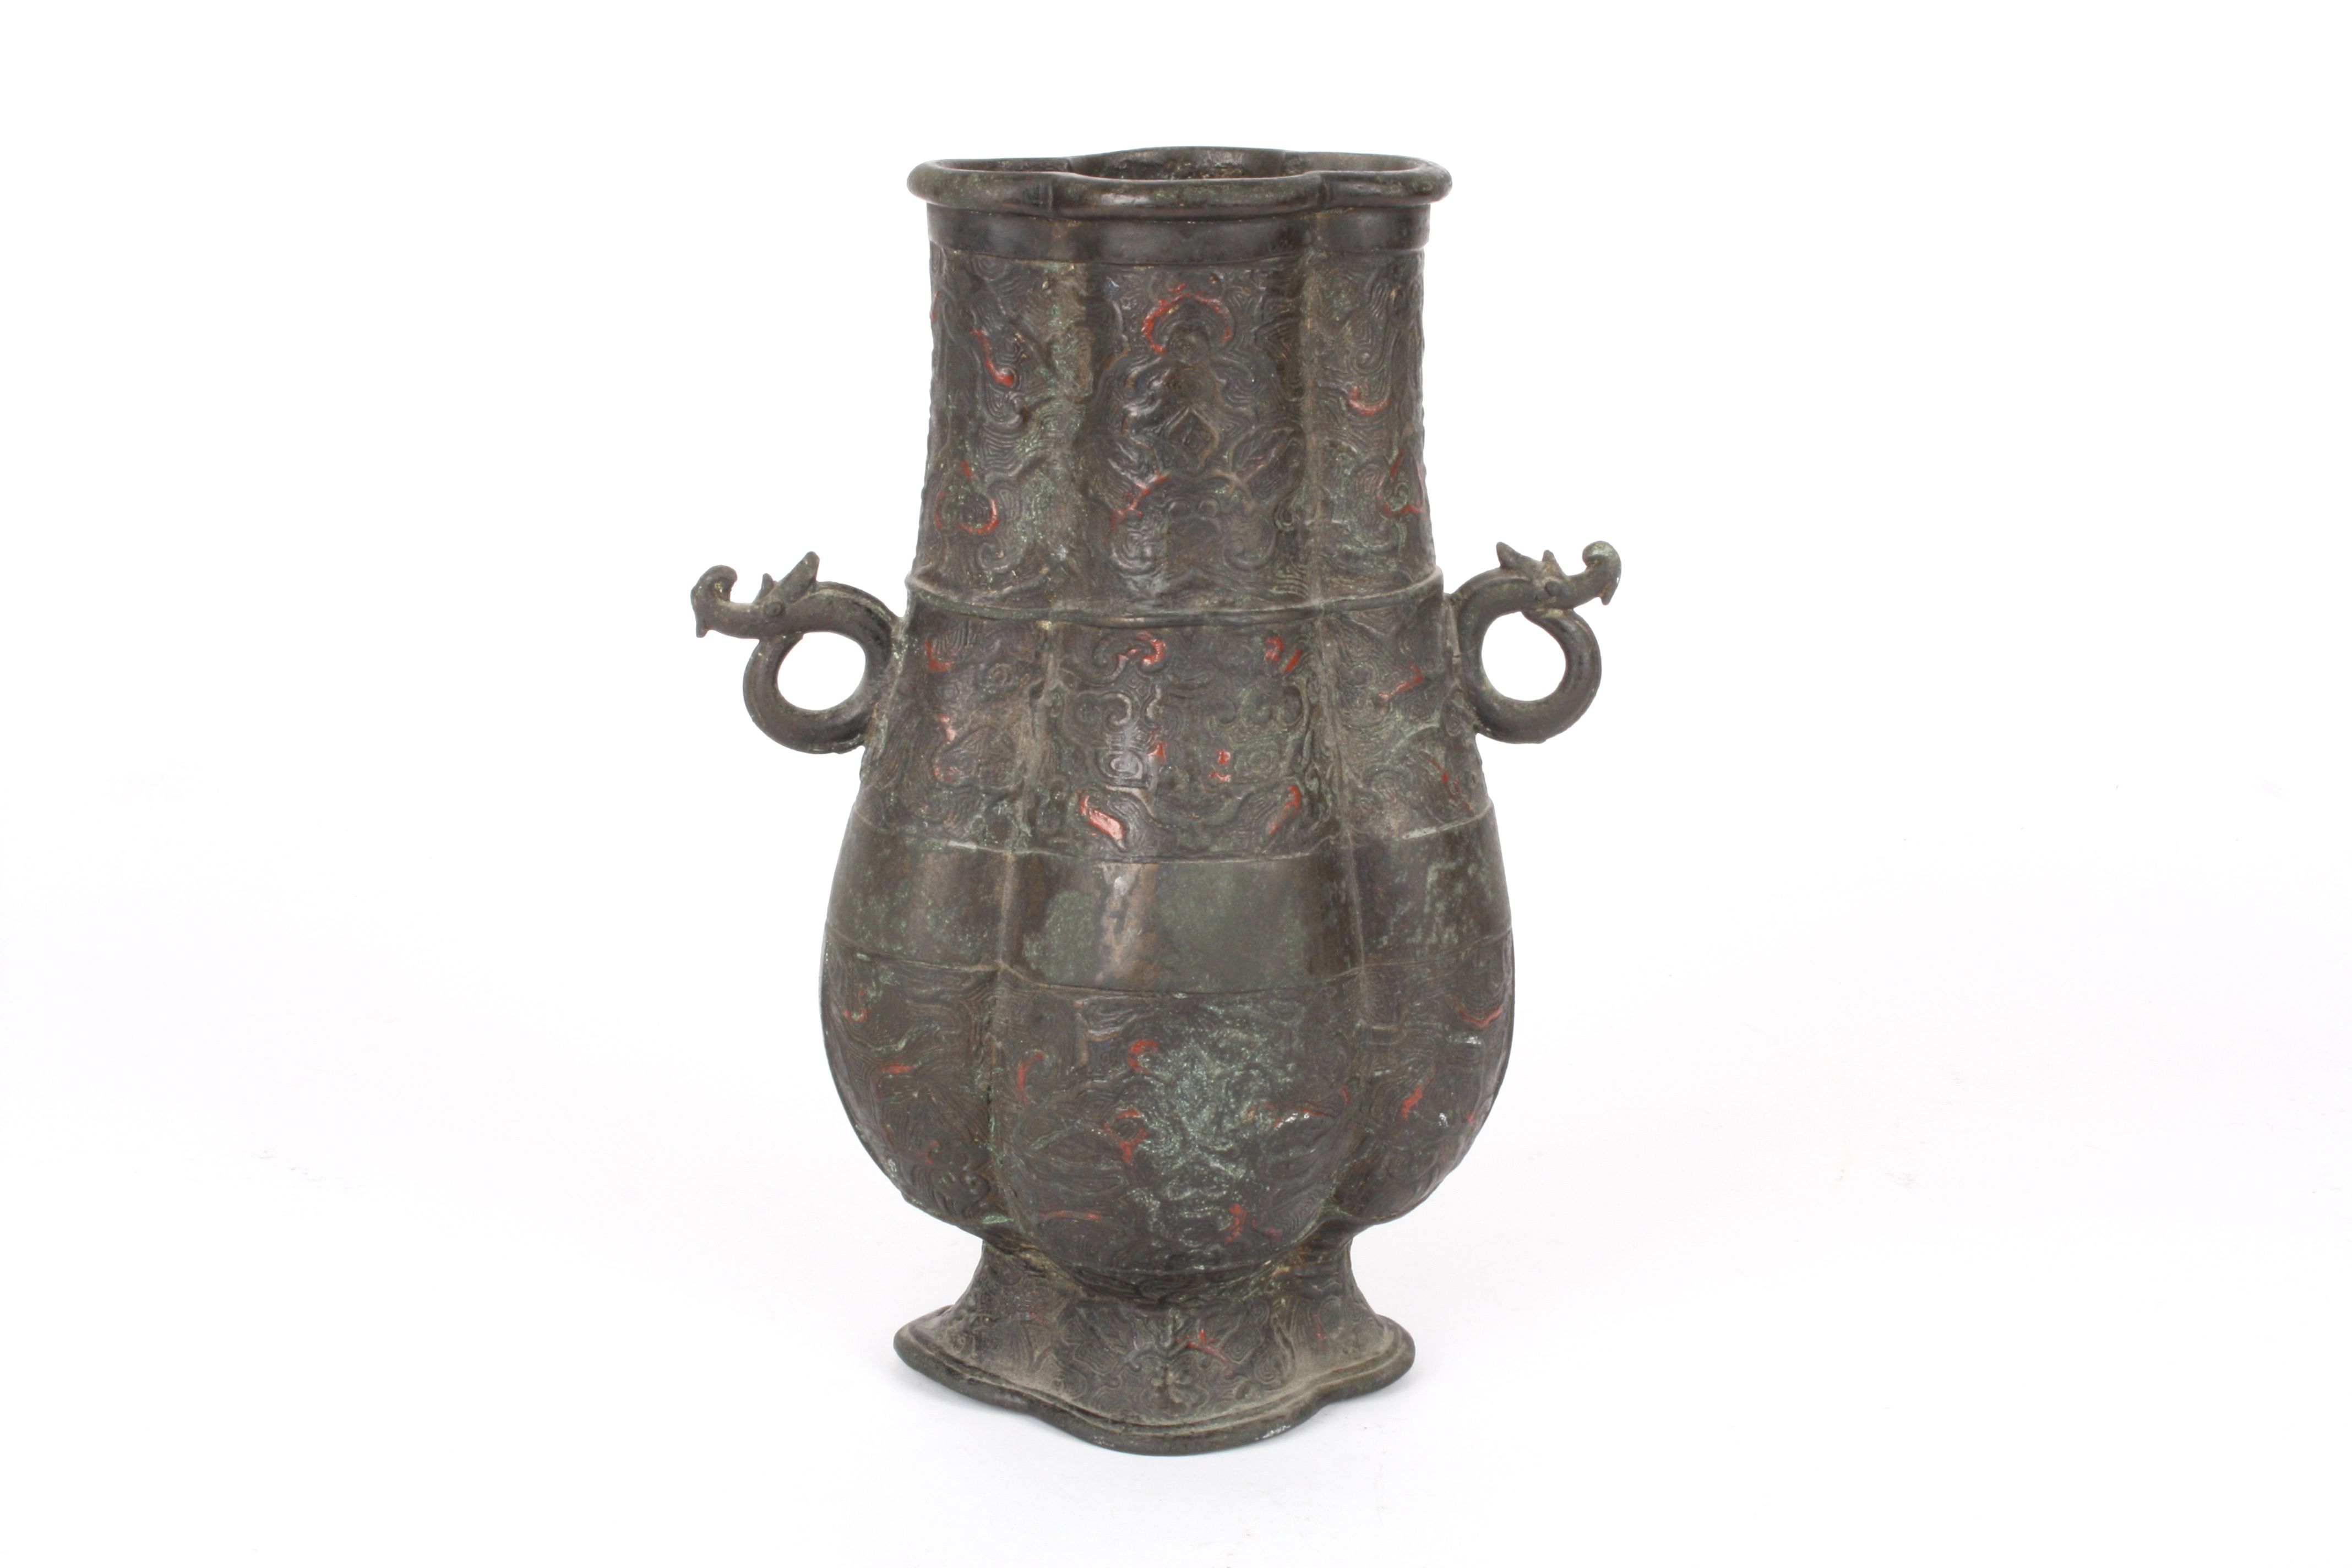 A Chinese bronze and enamel archaic hu vase
18th or 19th century, decorated with bands of scrolls - Image 2 of 3